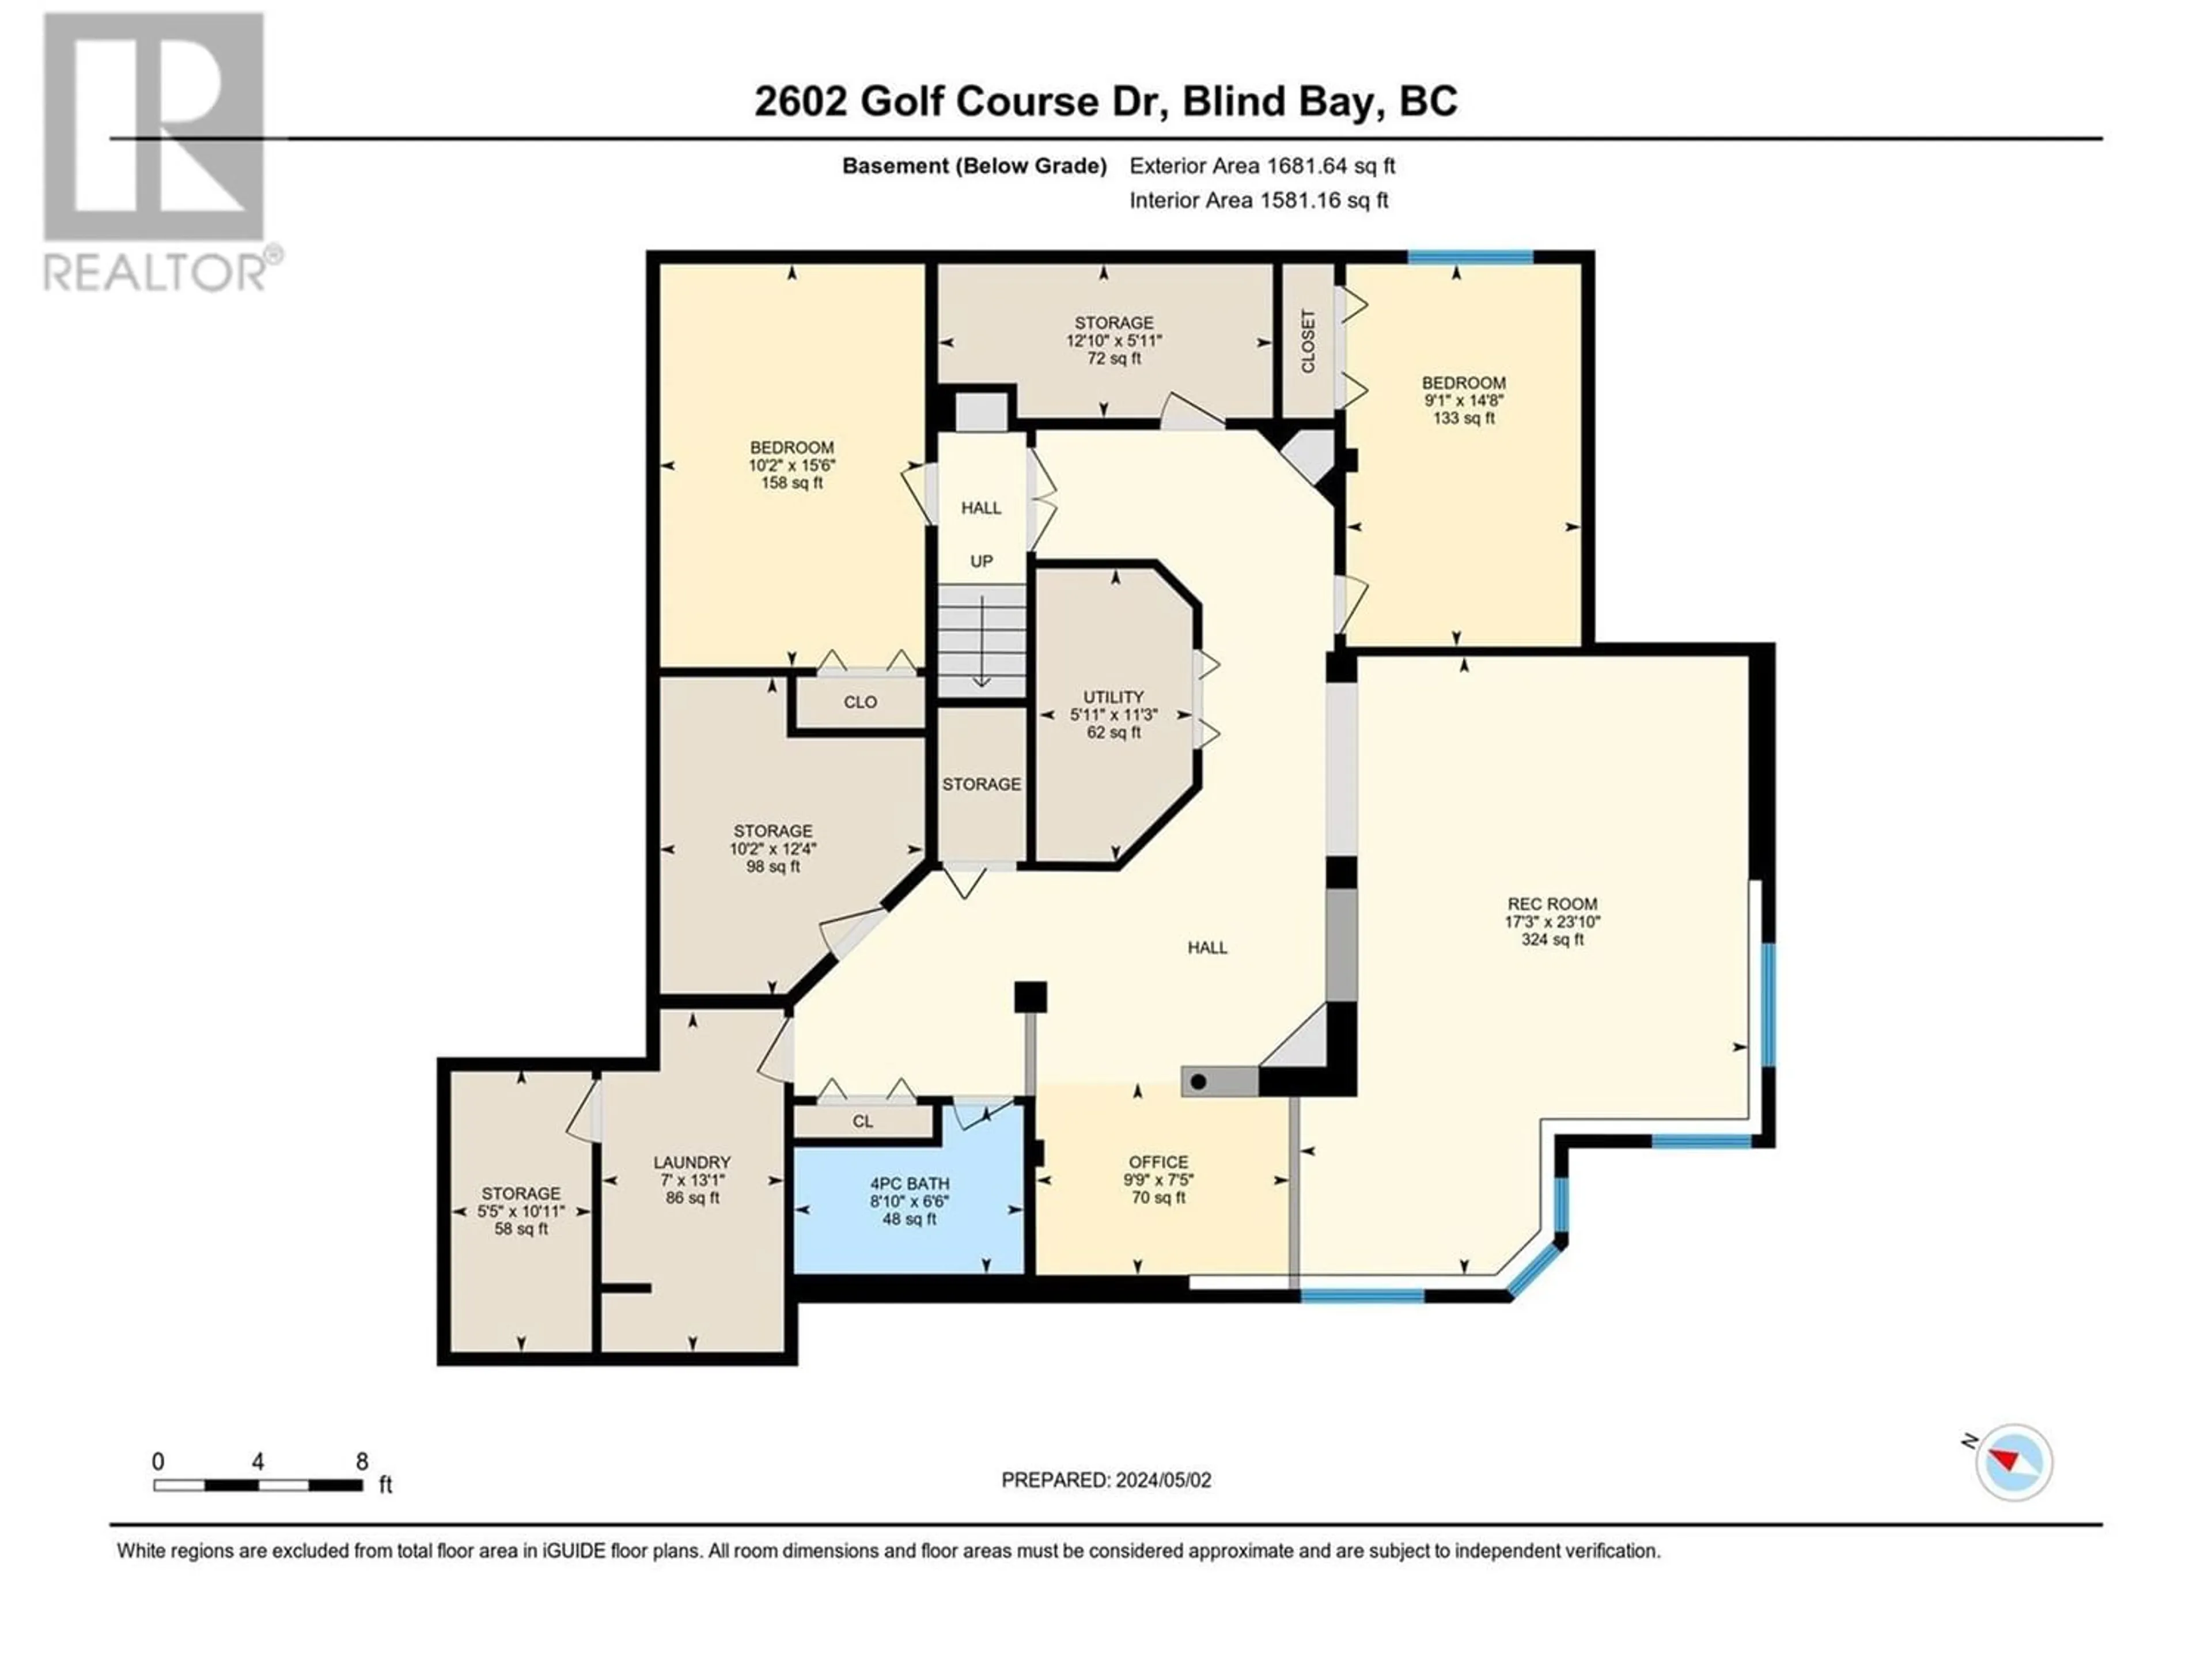 Floor plan for 2602 Golf Course Drive, Blind Bay British Columbia V0E1H2